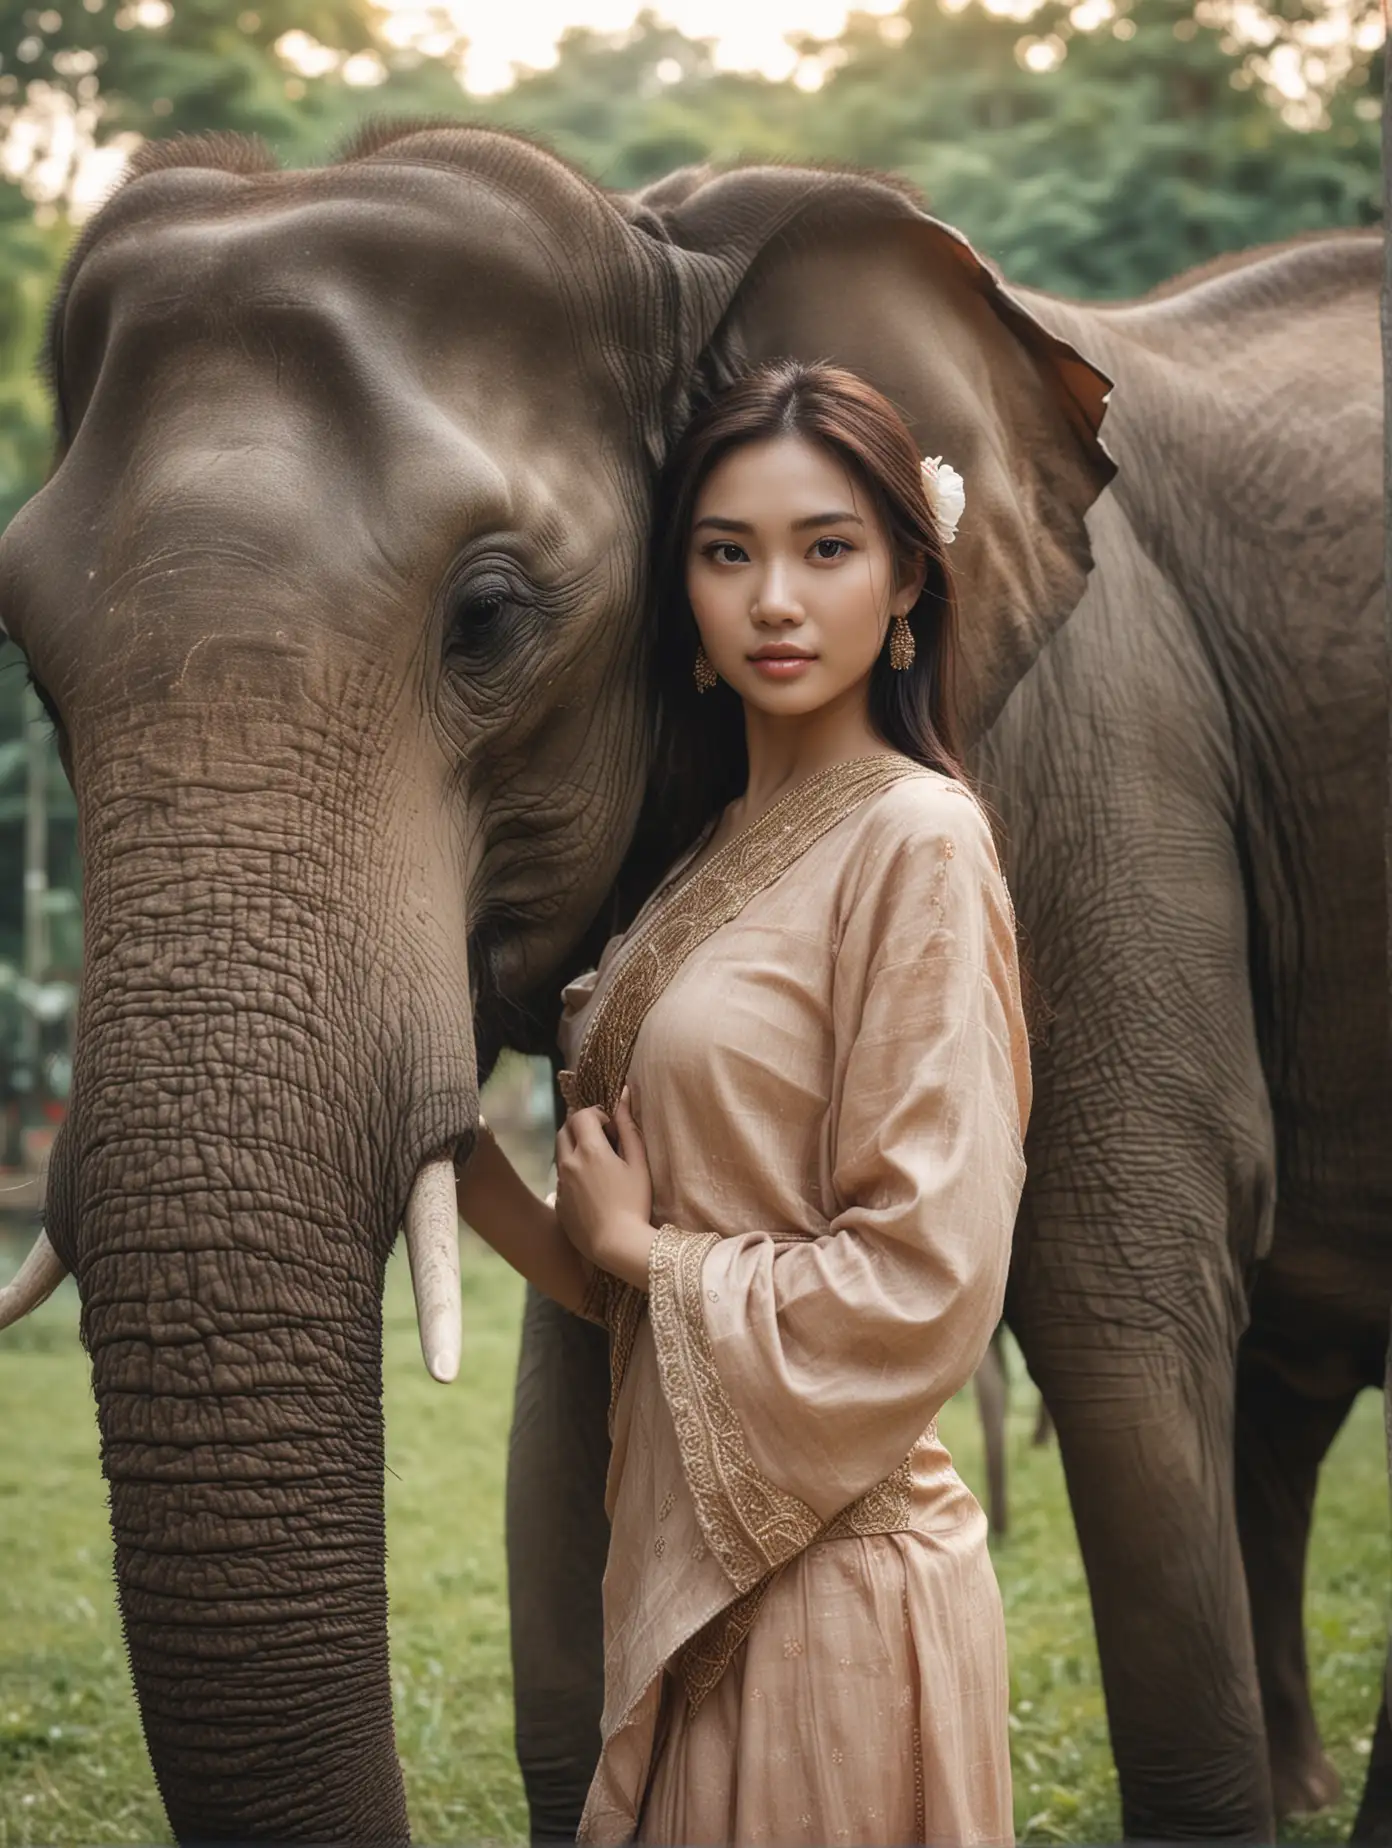 Confident Thai Beauty Posing with Elephant in Surreal Outdoor Portrait